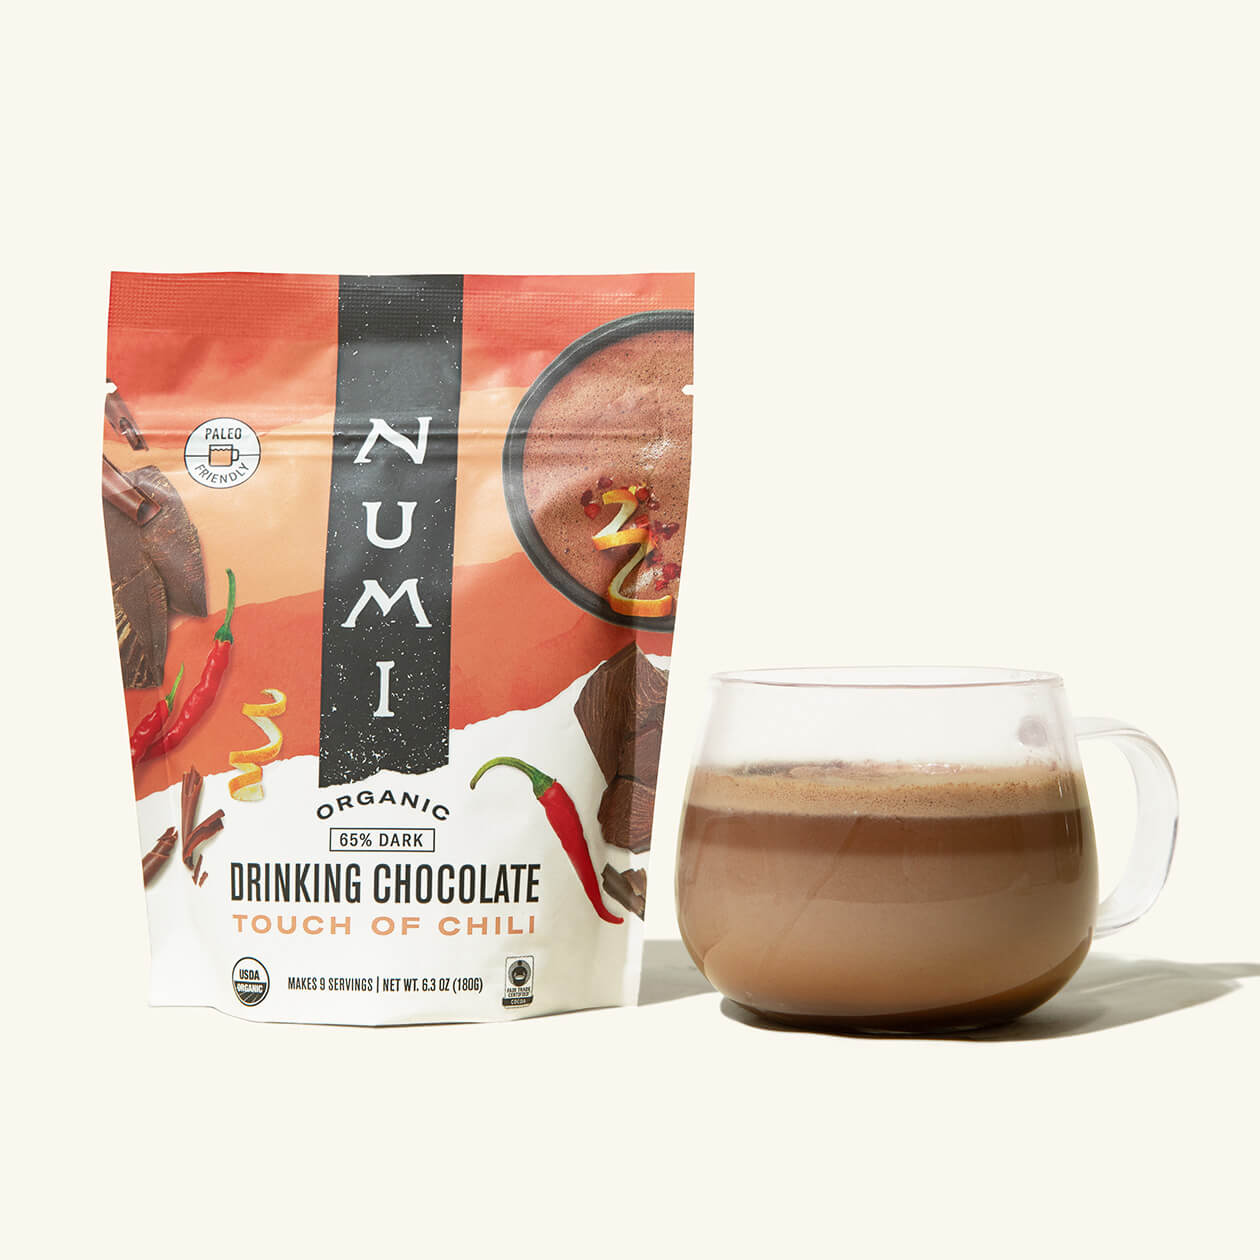 A pouch of Numi organic Drinking Chocolate, Touch of Chili Flavor, next to a cup of hot chocolate